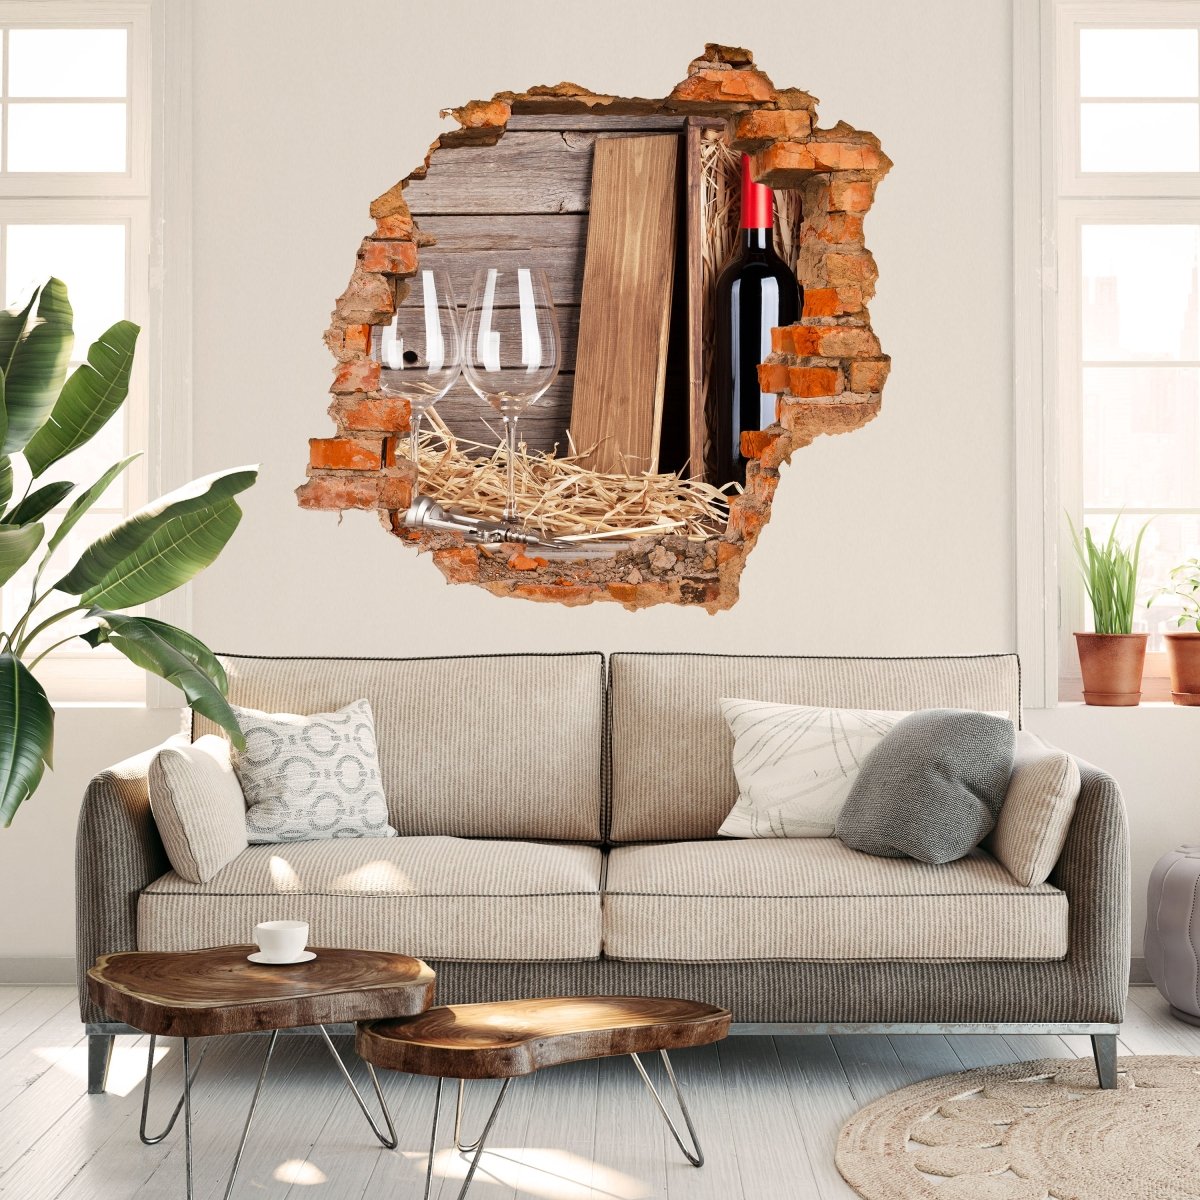 3D wall sticker red wine bottle and wine glasses - Wall Decal M0848